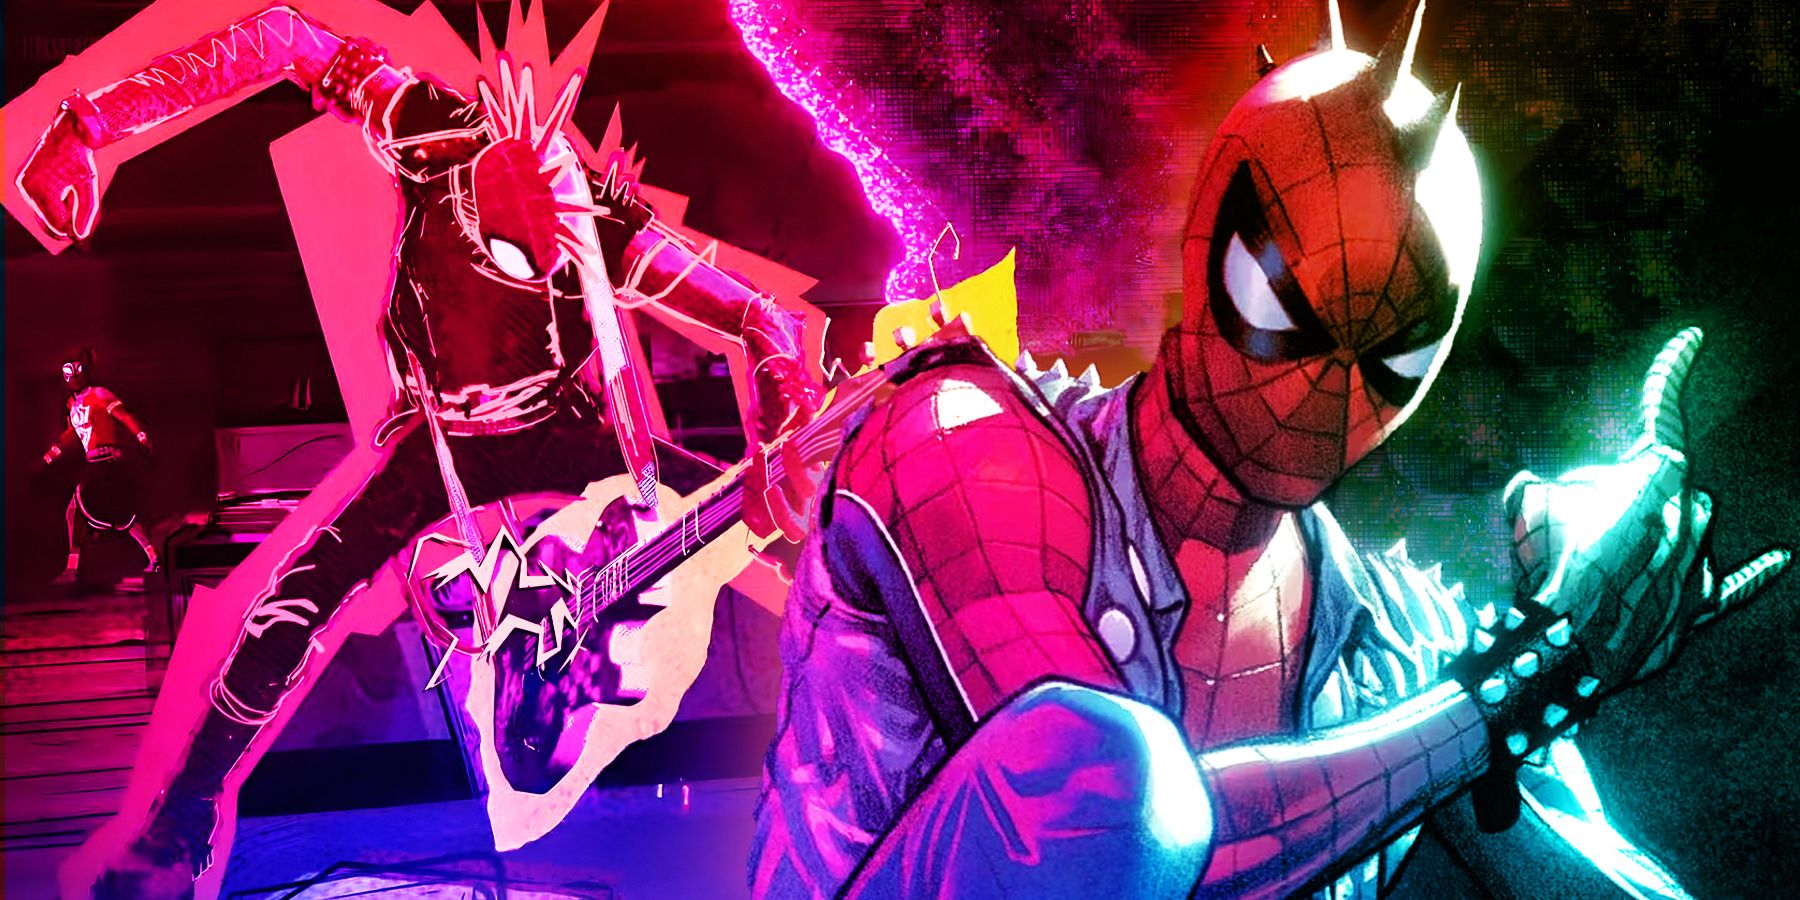 Spider-Punk playing the guitar as seen in Spider-Man: Across the Spider-Verse and Spider-Punk as seen in comic Spider-Punk: Banned in D.C.